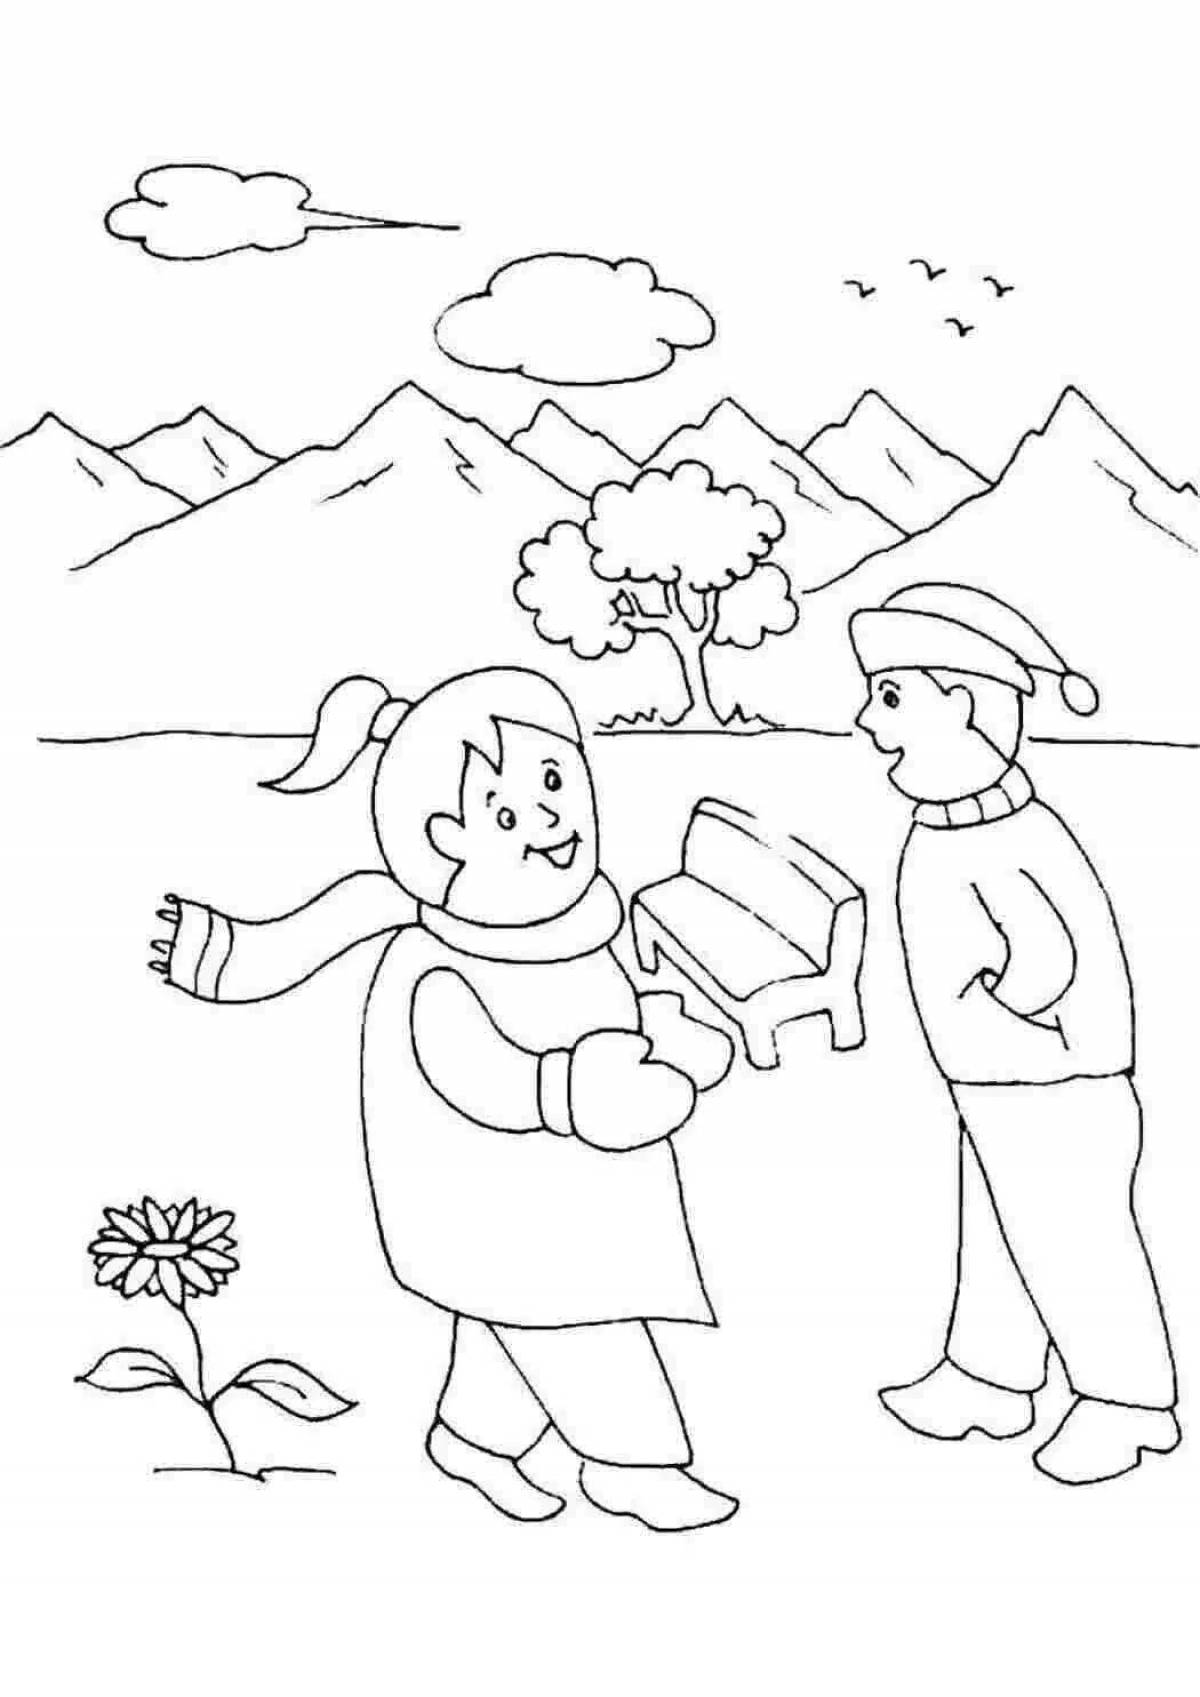 Coloring book magical kys turaly